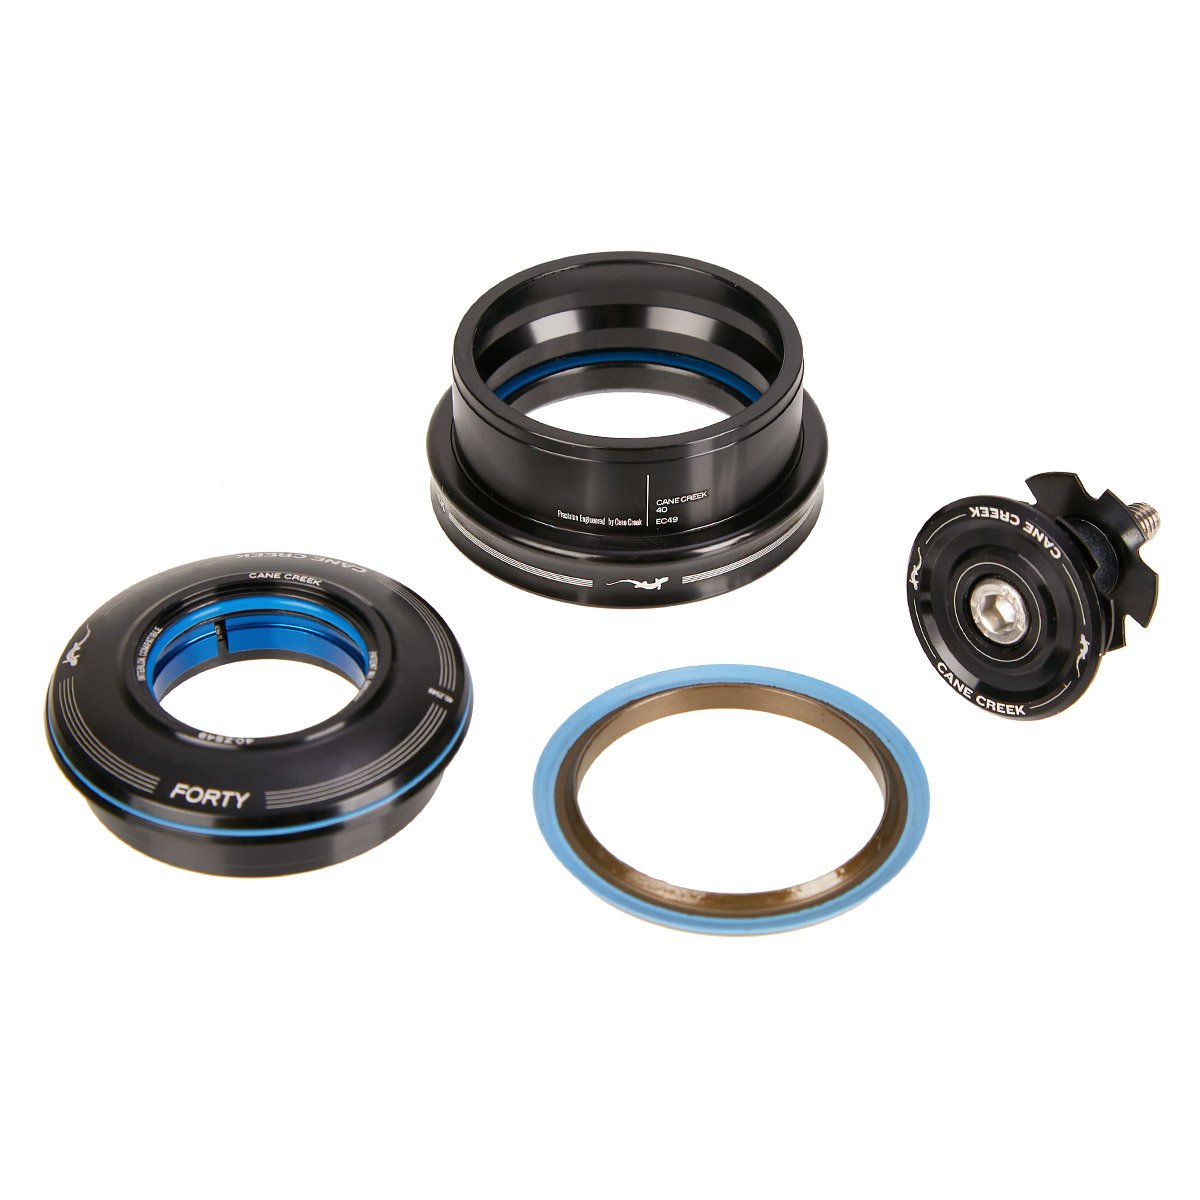 Cane Creek Headset 40 ZS49/28.6 | EC49/40, Tapered